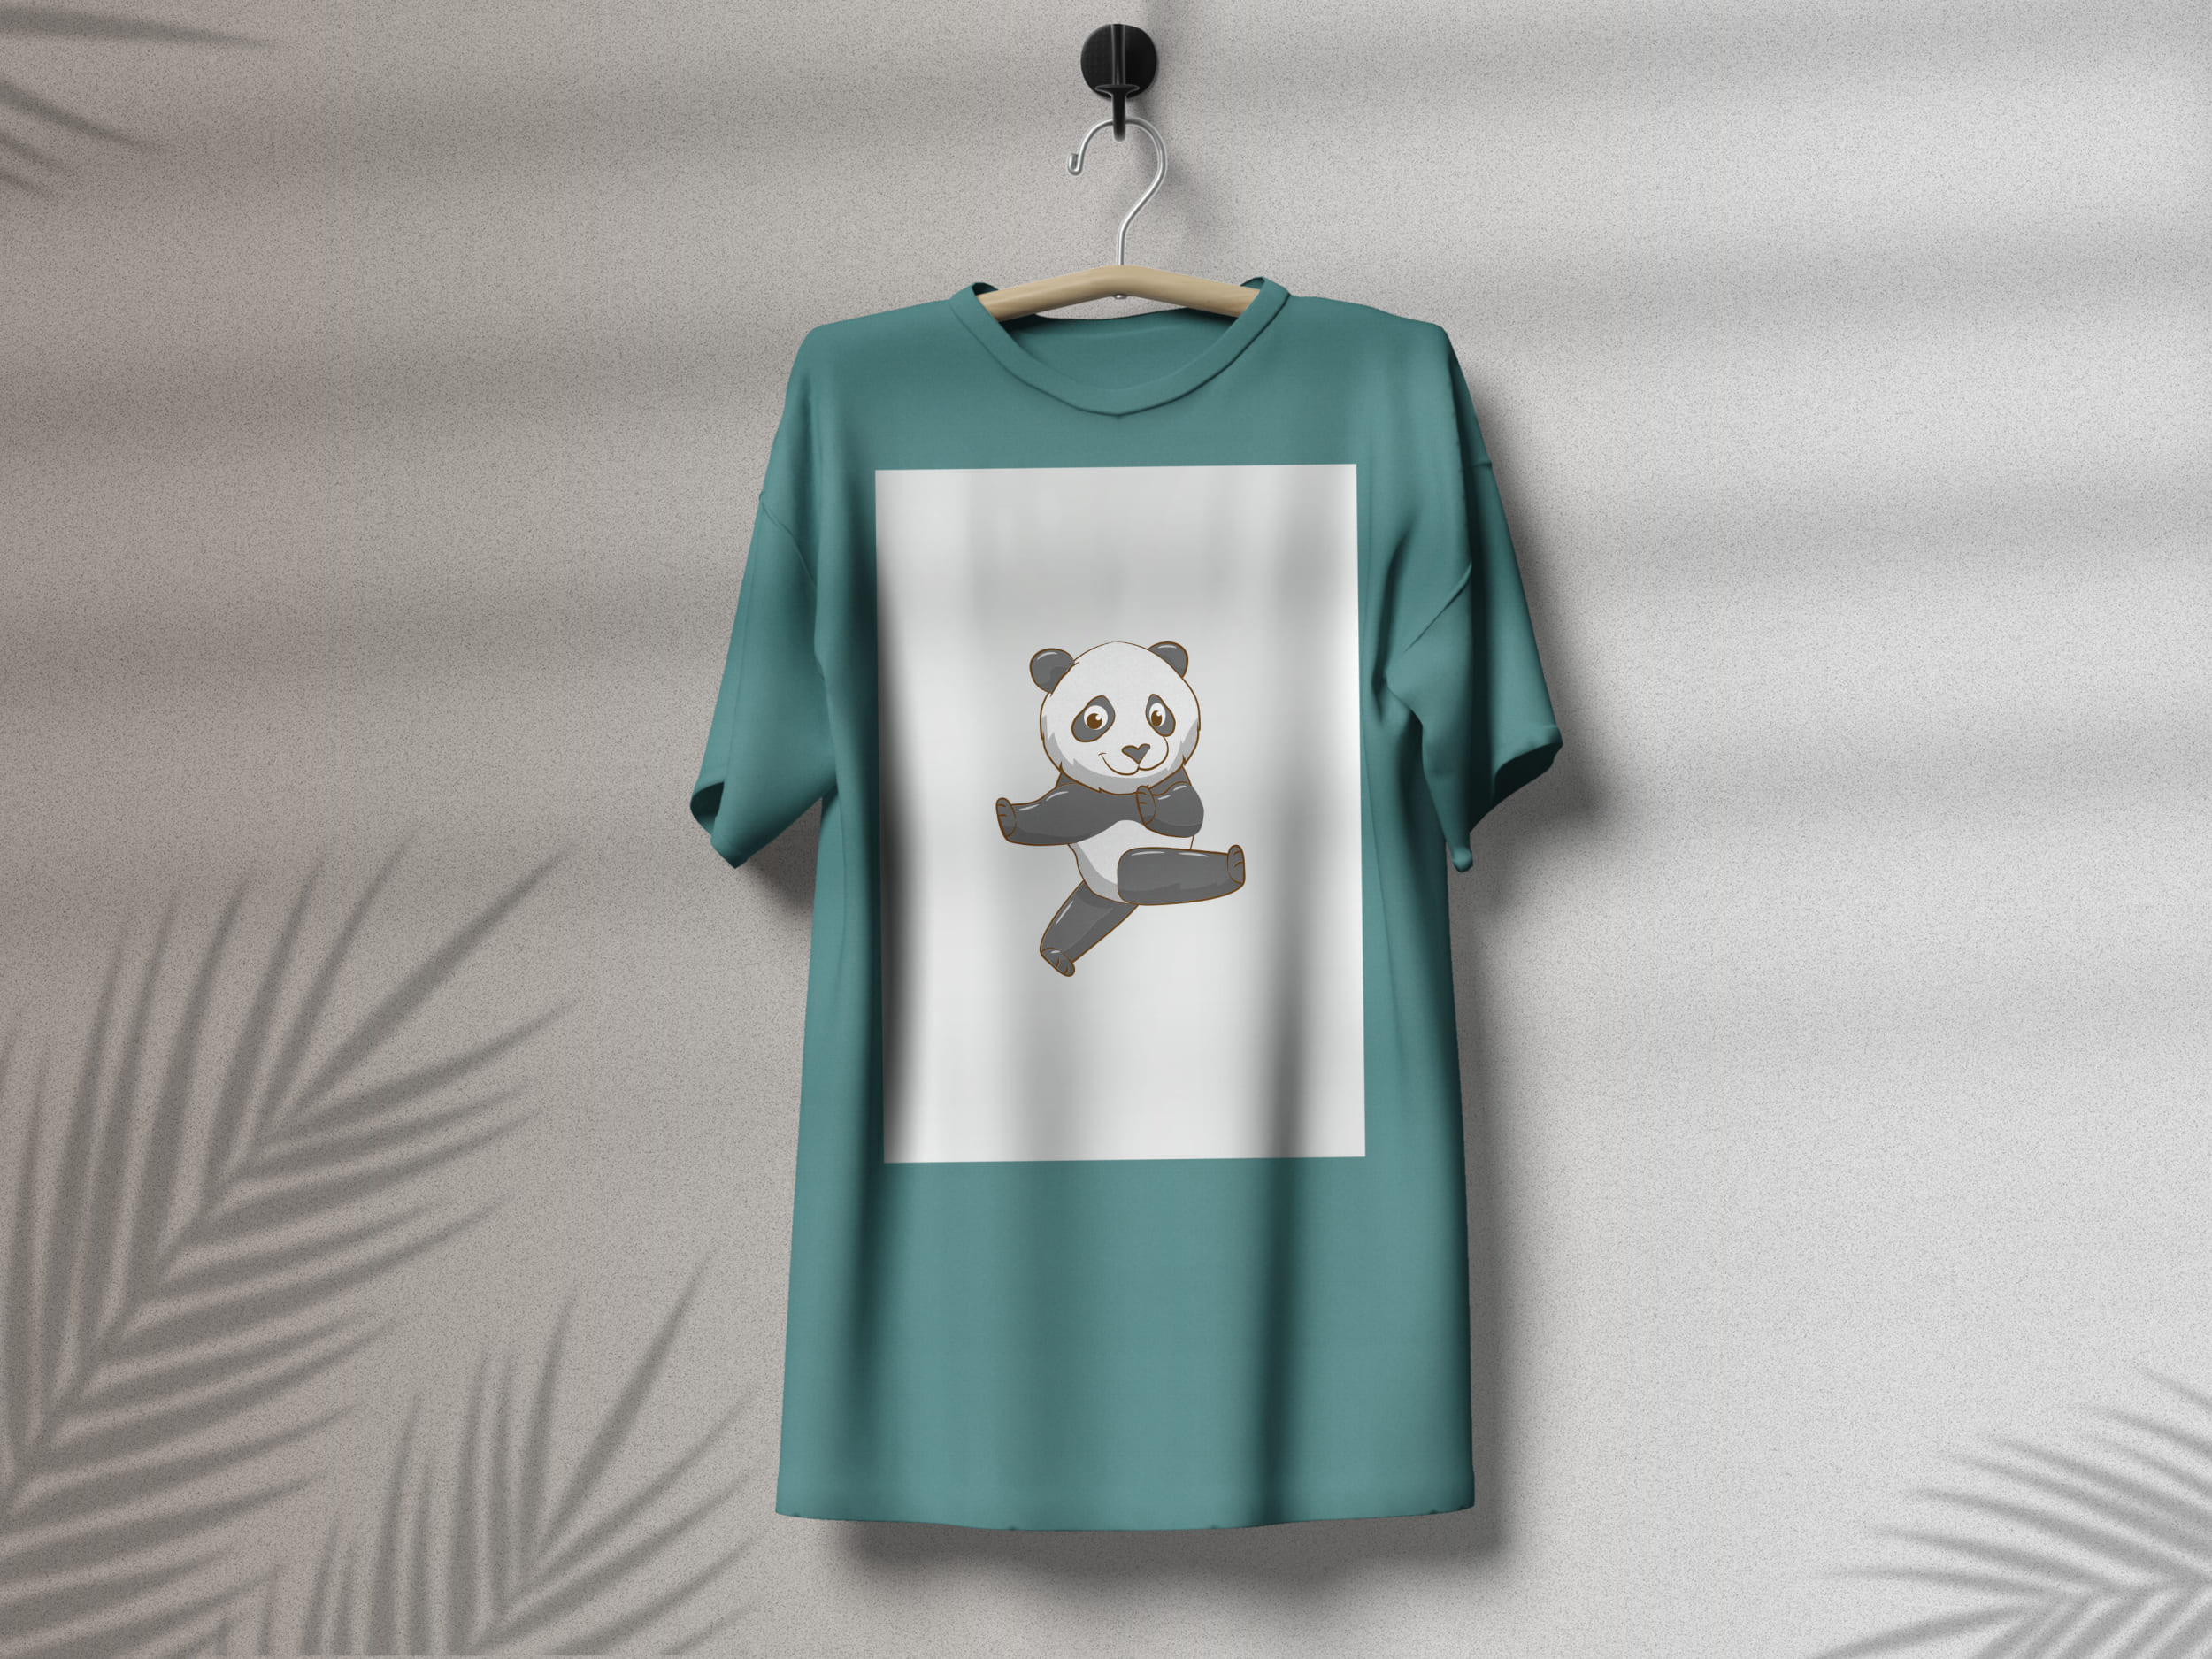 Turquoise t-shirt with a funny panda on a white background, on a hanger on a gray background